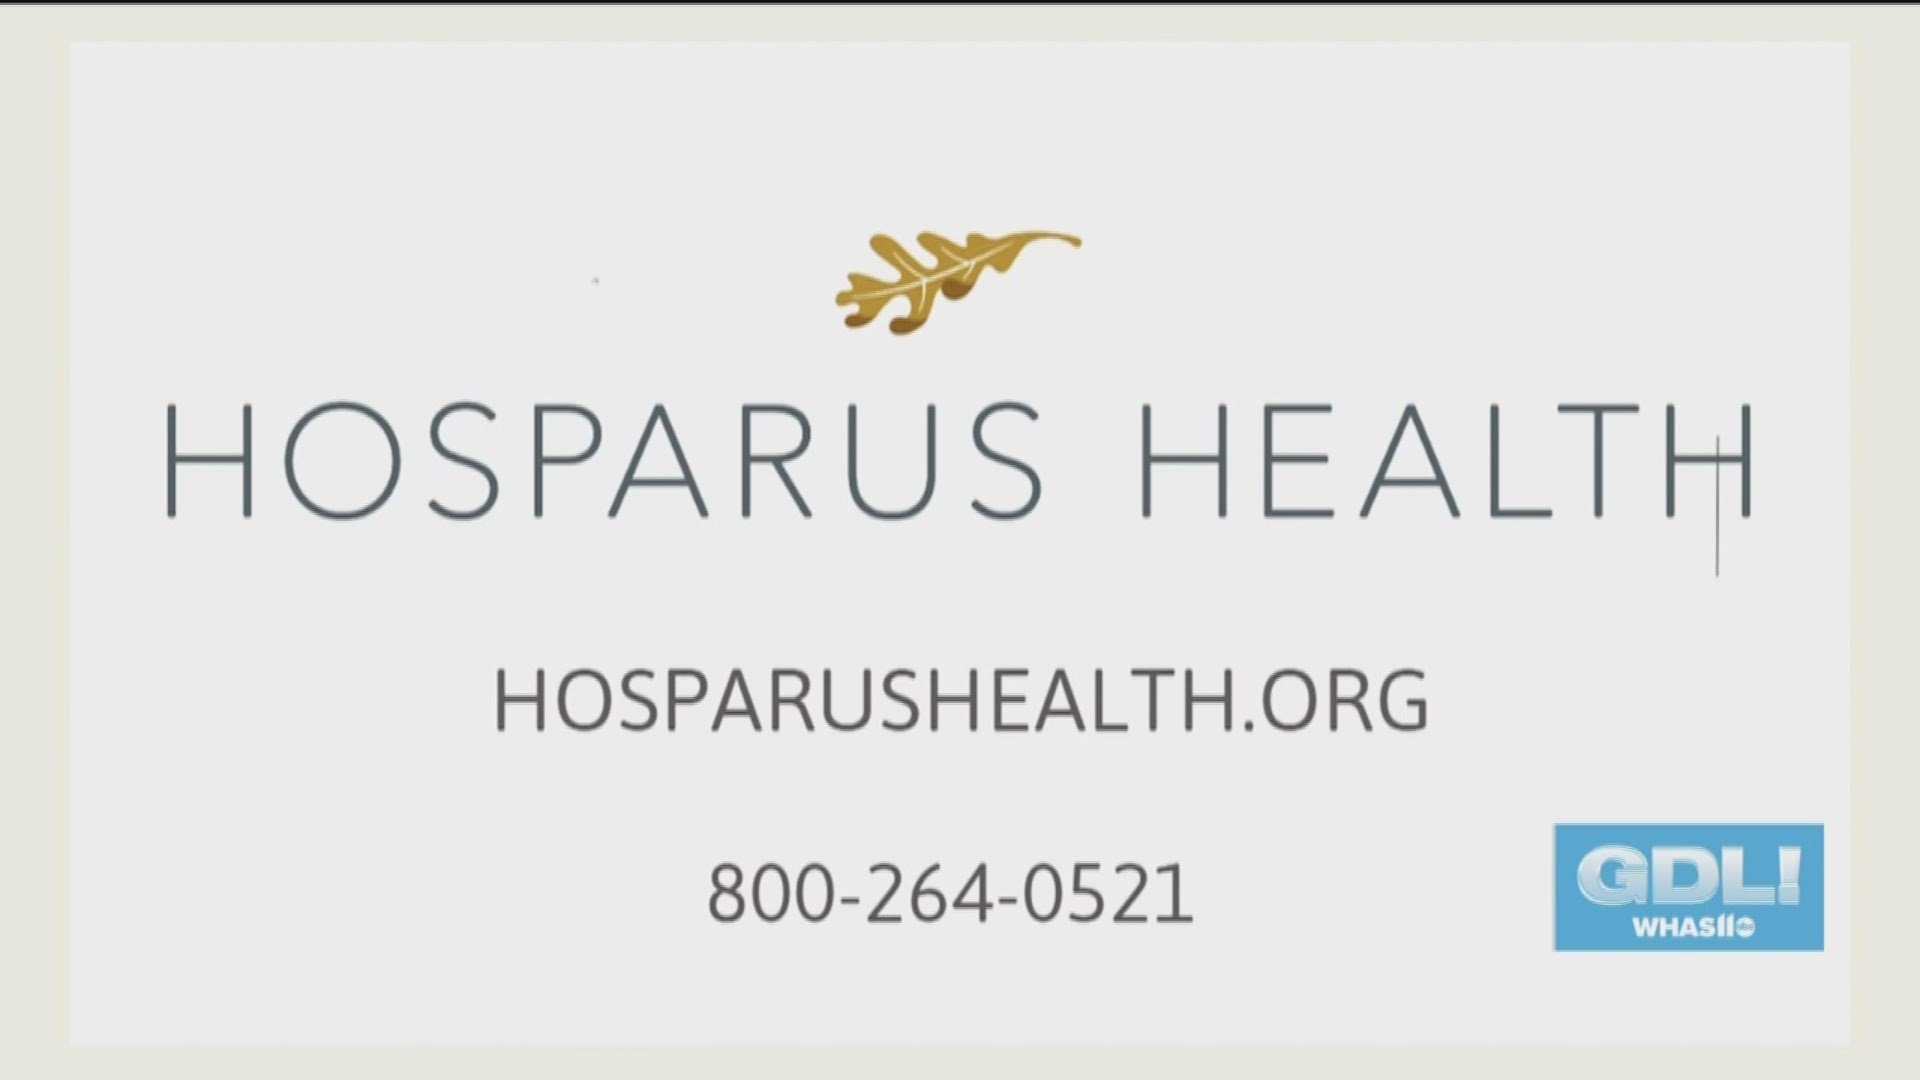 For 40 years, thousands of people living with serious and life-limiting illnesses in Kentucky and Indiana have relied on Hosparus Health to help them get the most out of each day. For more information, go to HosparusHealth.org or call 800-264-0521. Volunteers are a big part of the program and Sylvia Johnson stopped by with Fred Woerner to talk about Hosparus Health and all they do to help people of all ages, including veterans.